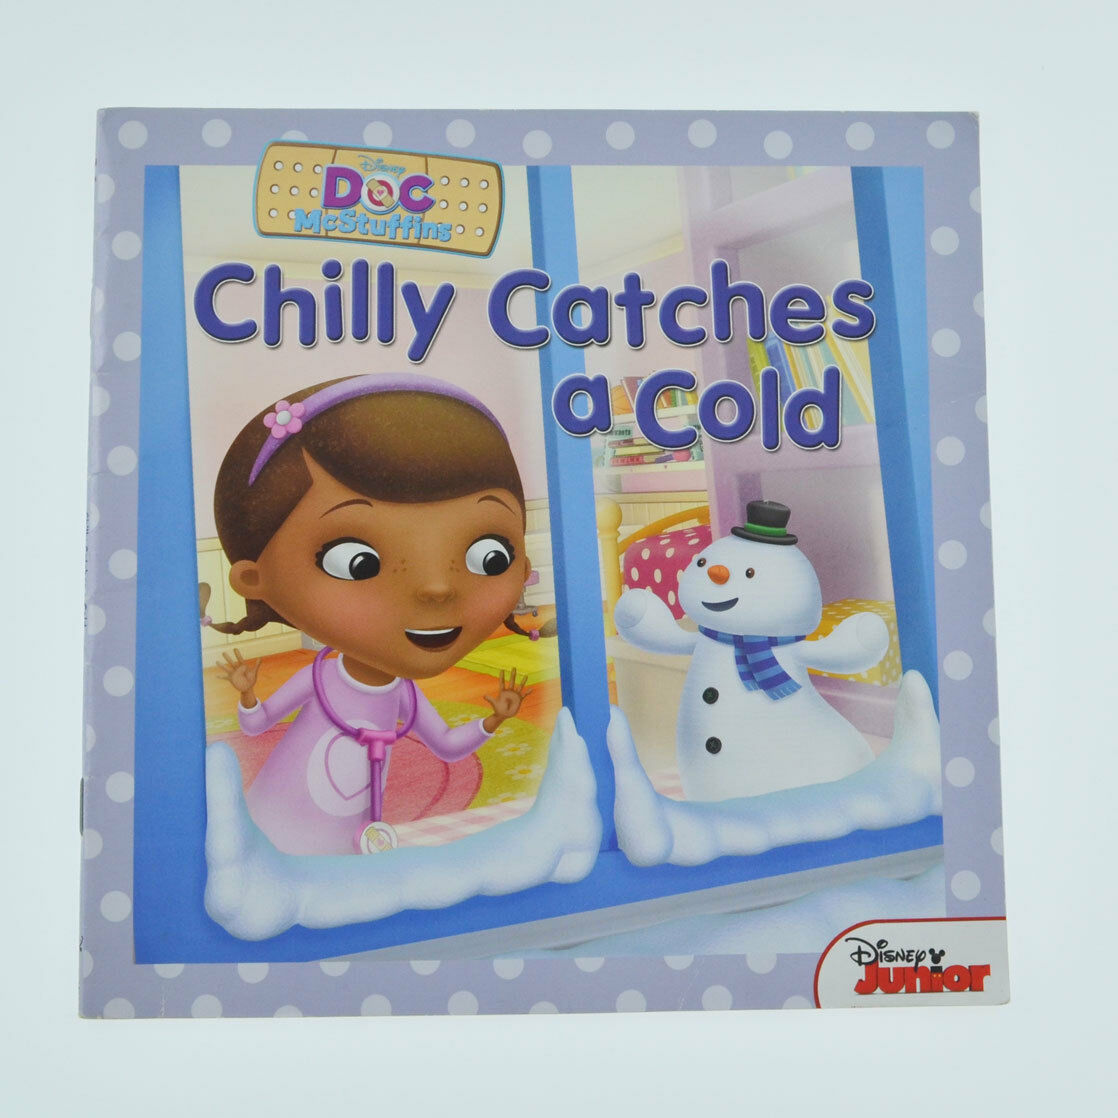 Chilly Catches a Cold by Disney and Sheila Sweeny Higginson (2013, Paperback)